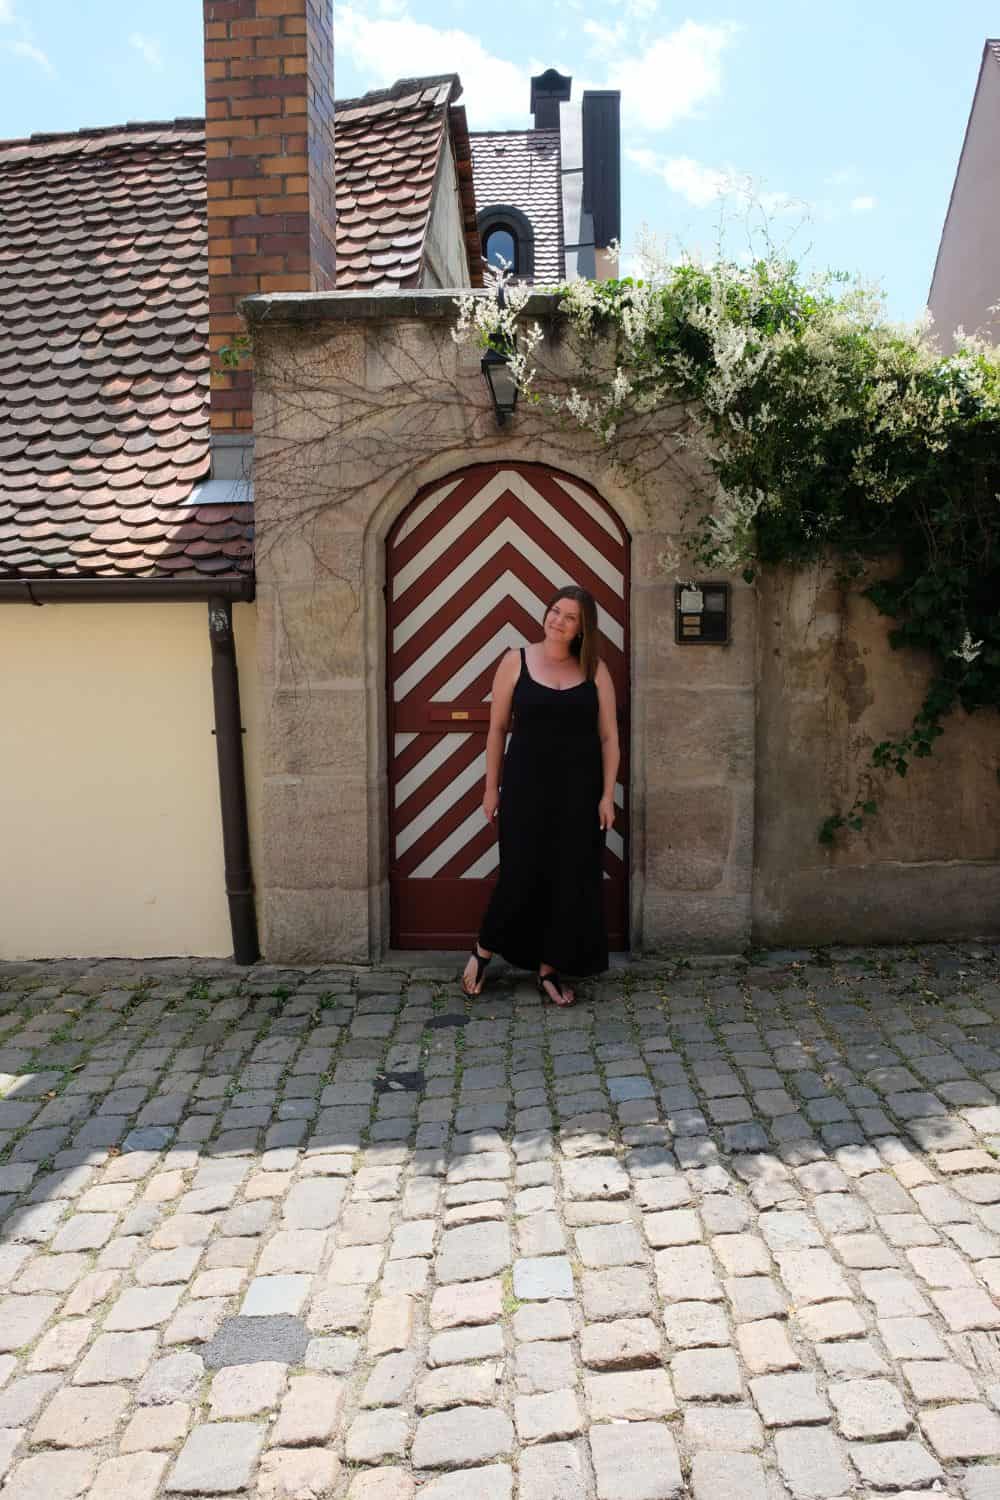 A woman in a black dress stands smiling by a distinctive red and white patterned door in Nuremberg, surrounded by the city's charming cobblestone streets. A cascade of white blossoms hangs over the stone archway, adding a touch of natural beauty to this quaint, historic setting, perfect for a leisurely exploration on a sunny day.